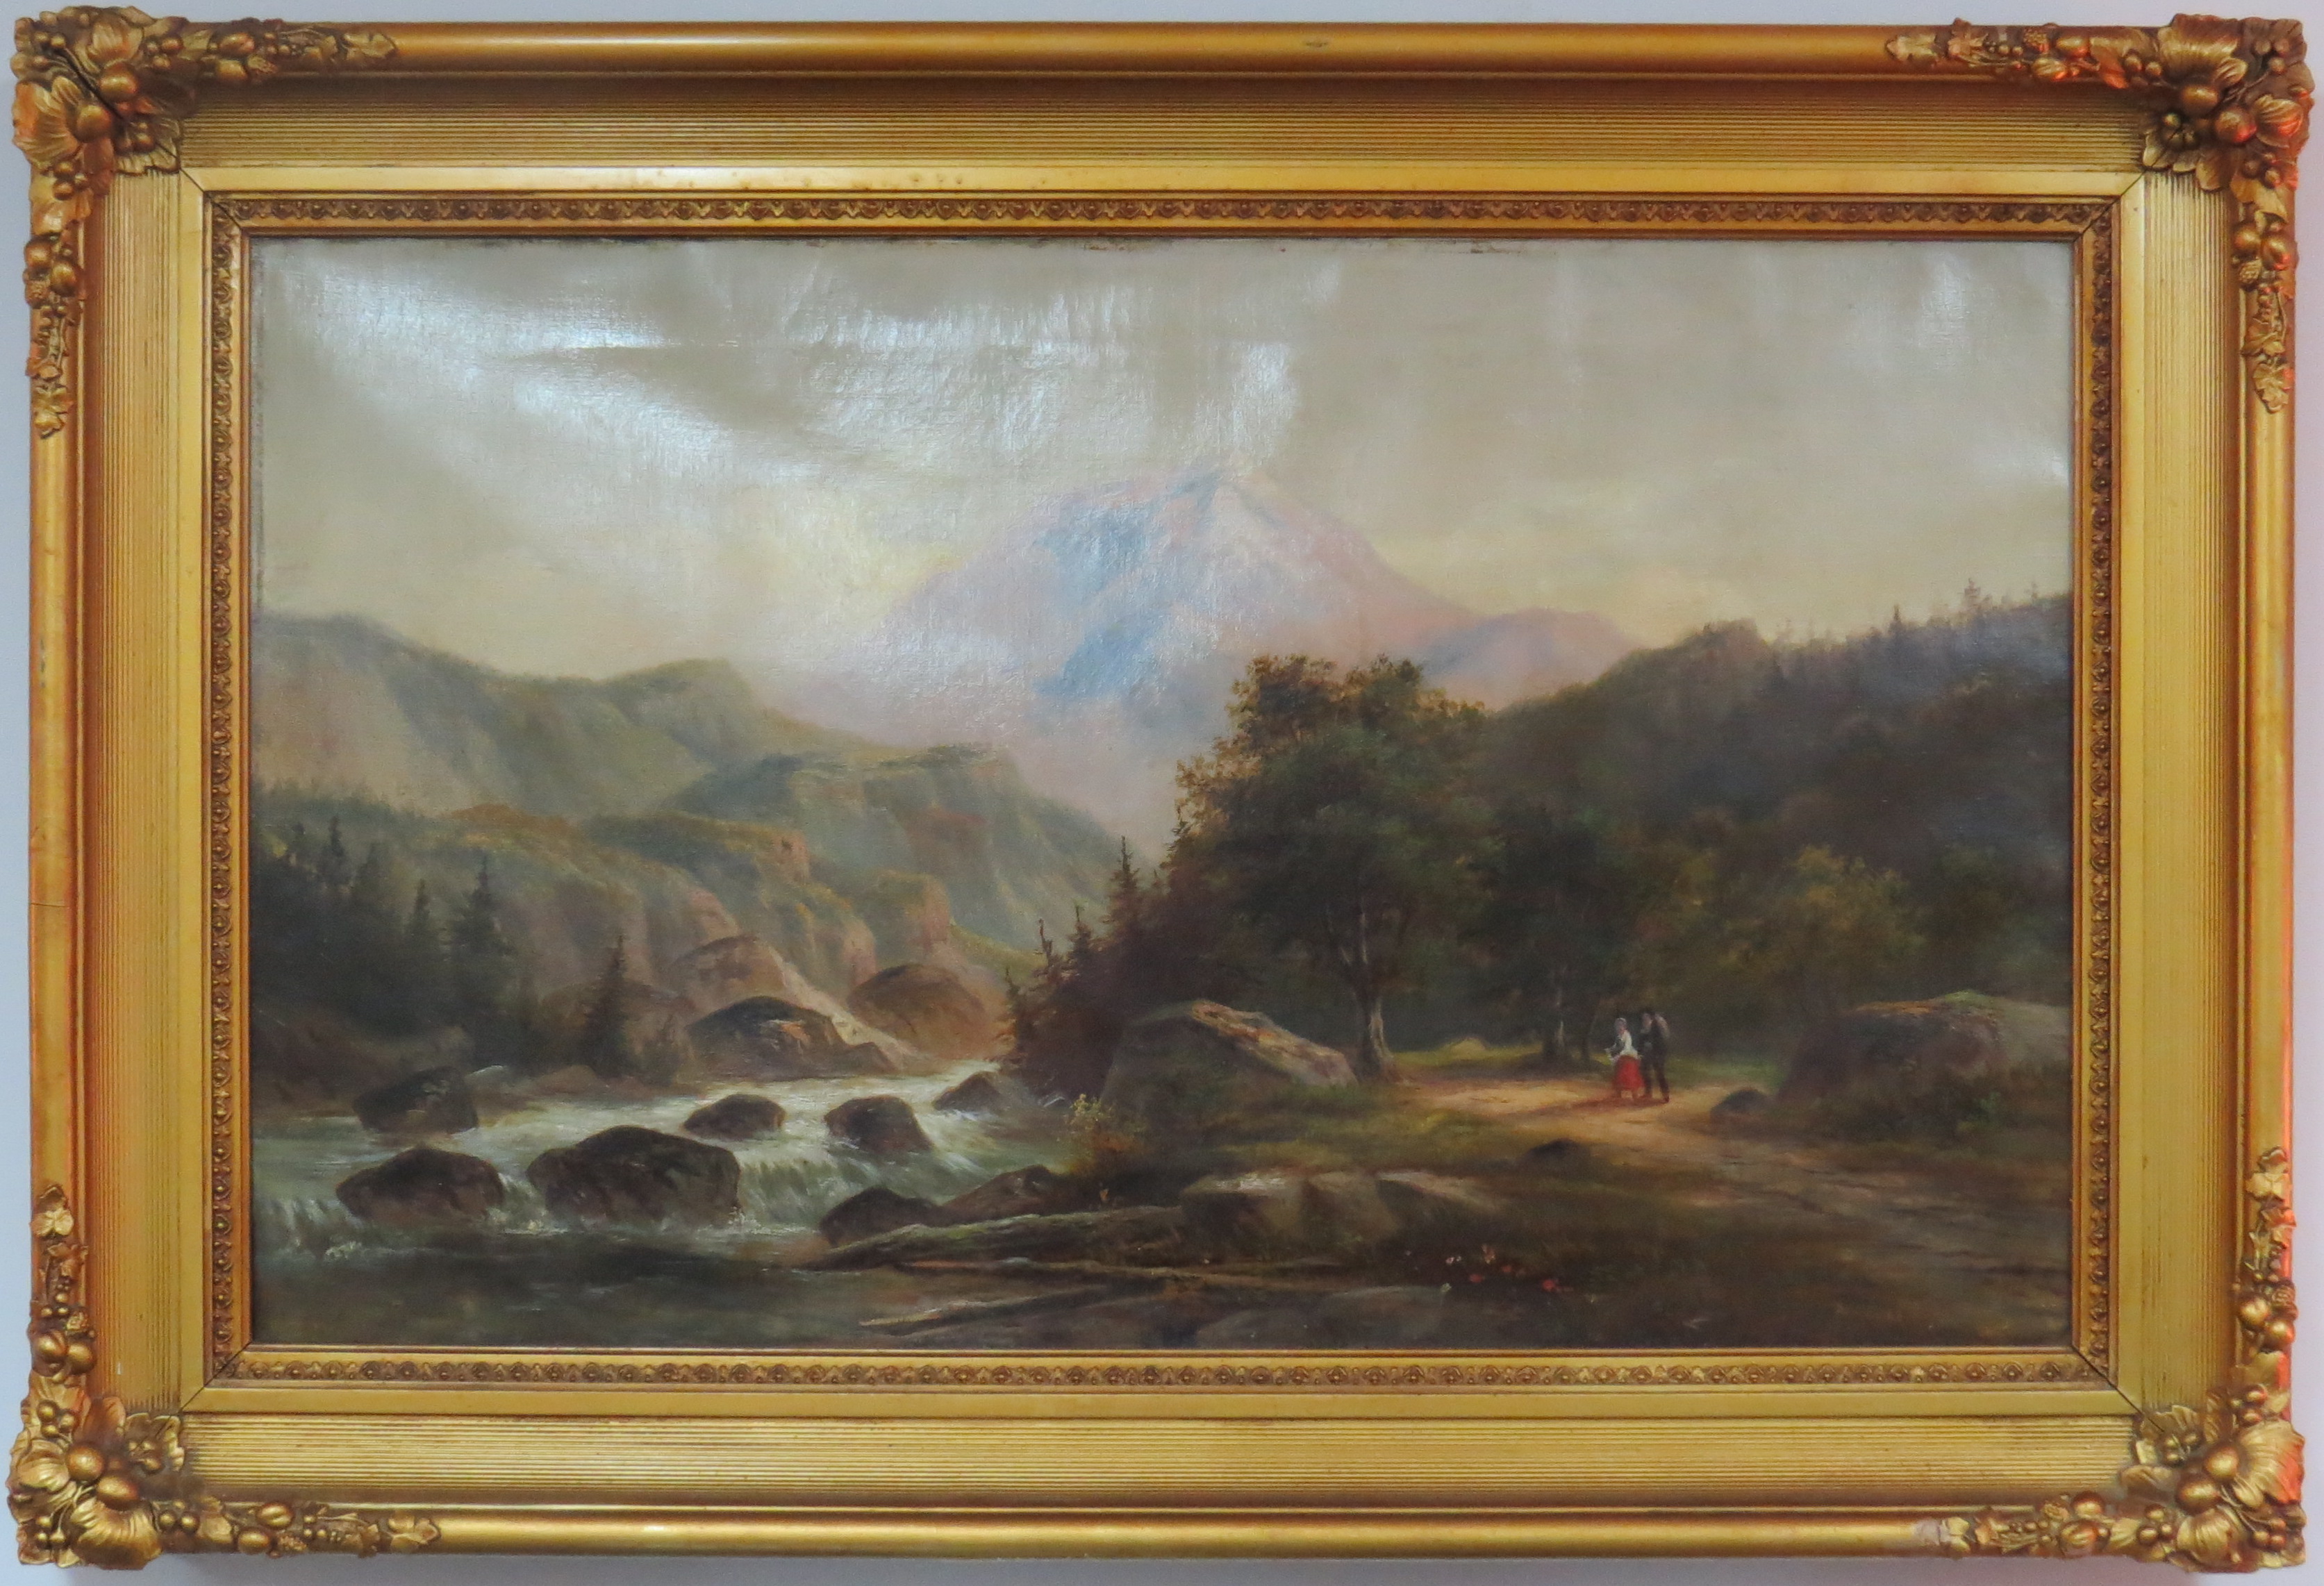 Oil on Canvas of a River Scene in a Carved and Gilt Frame